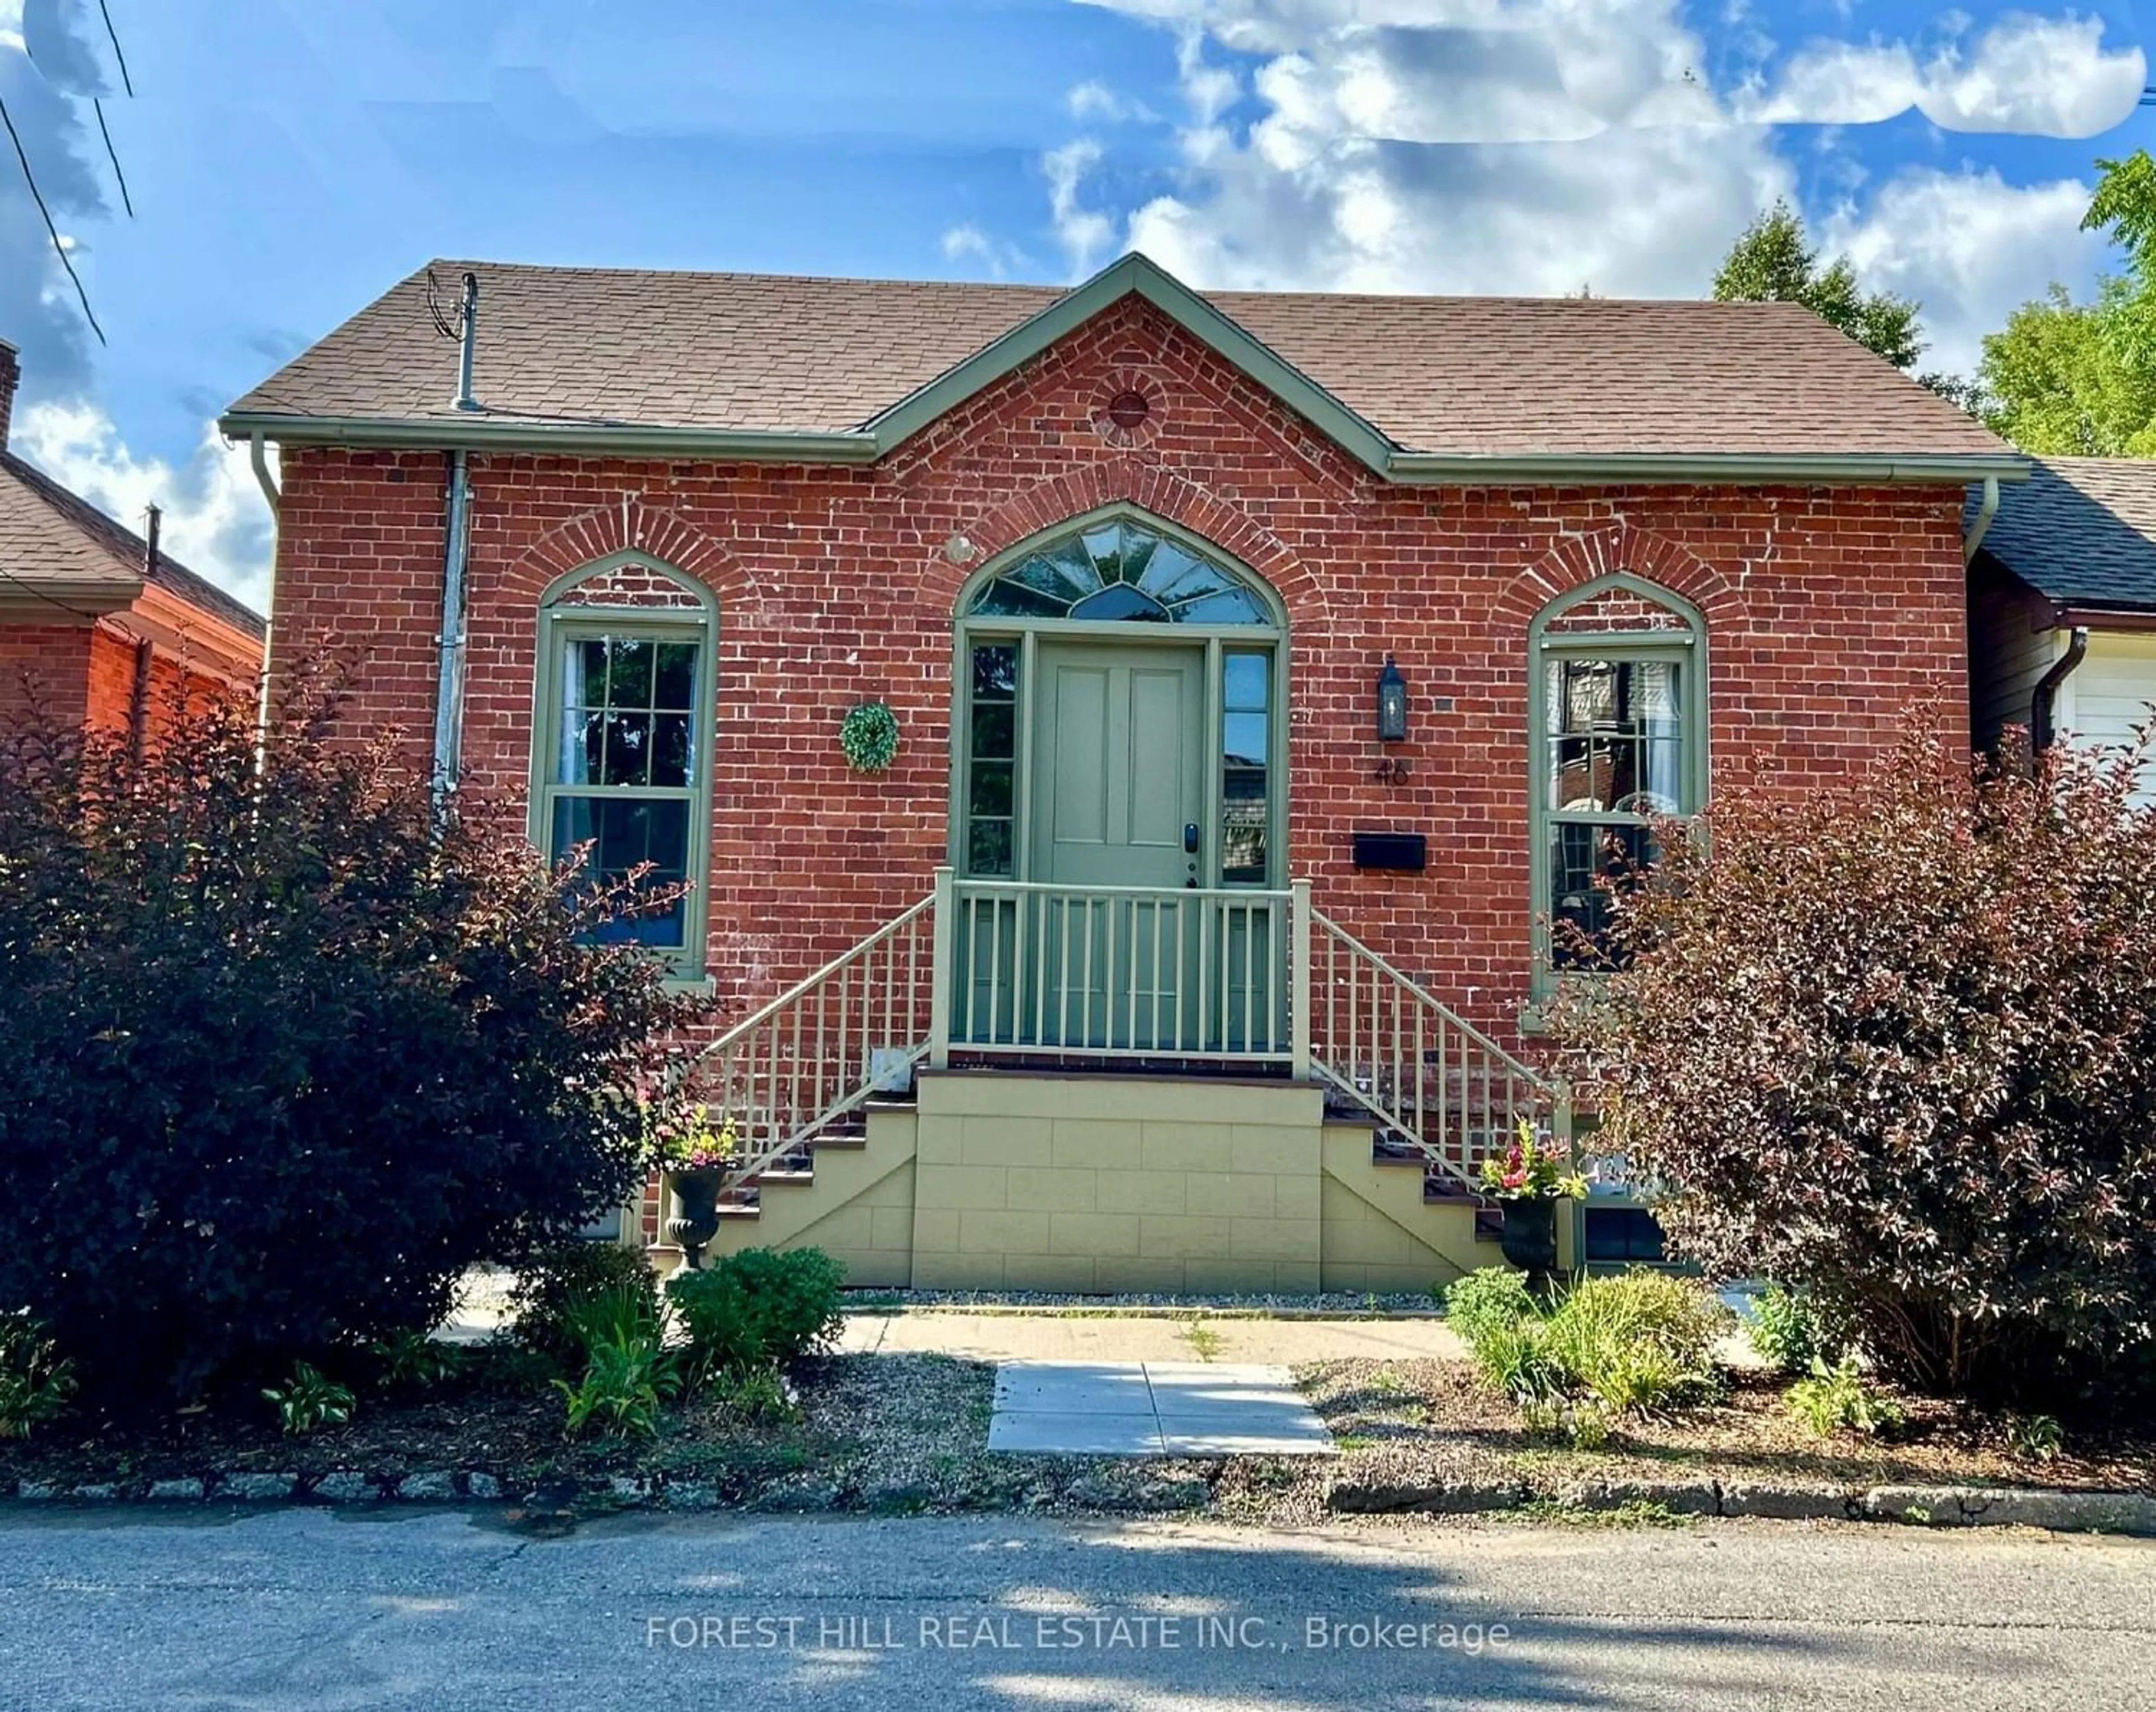 Home with brick exterior material for 46 Charles St, Port Hope Ontario L1A 1S4